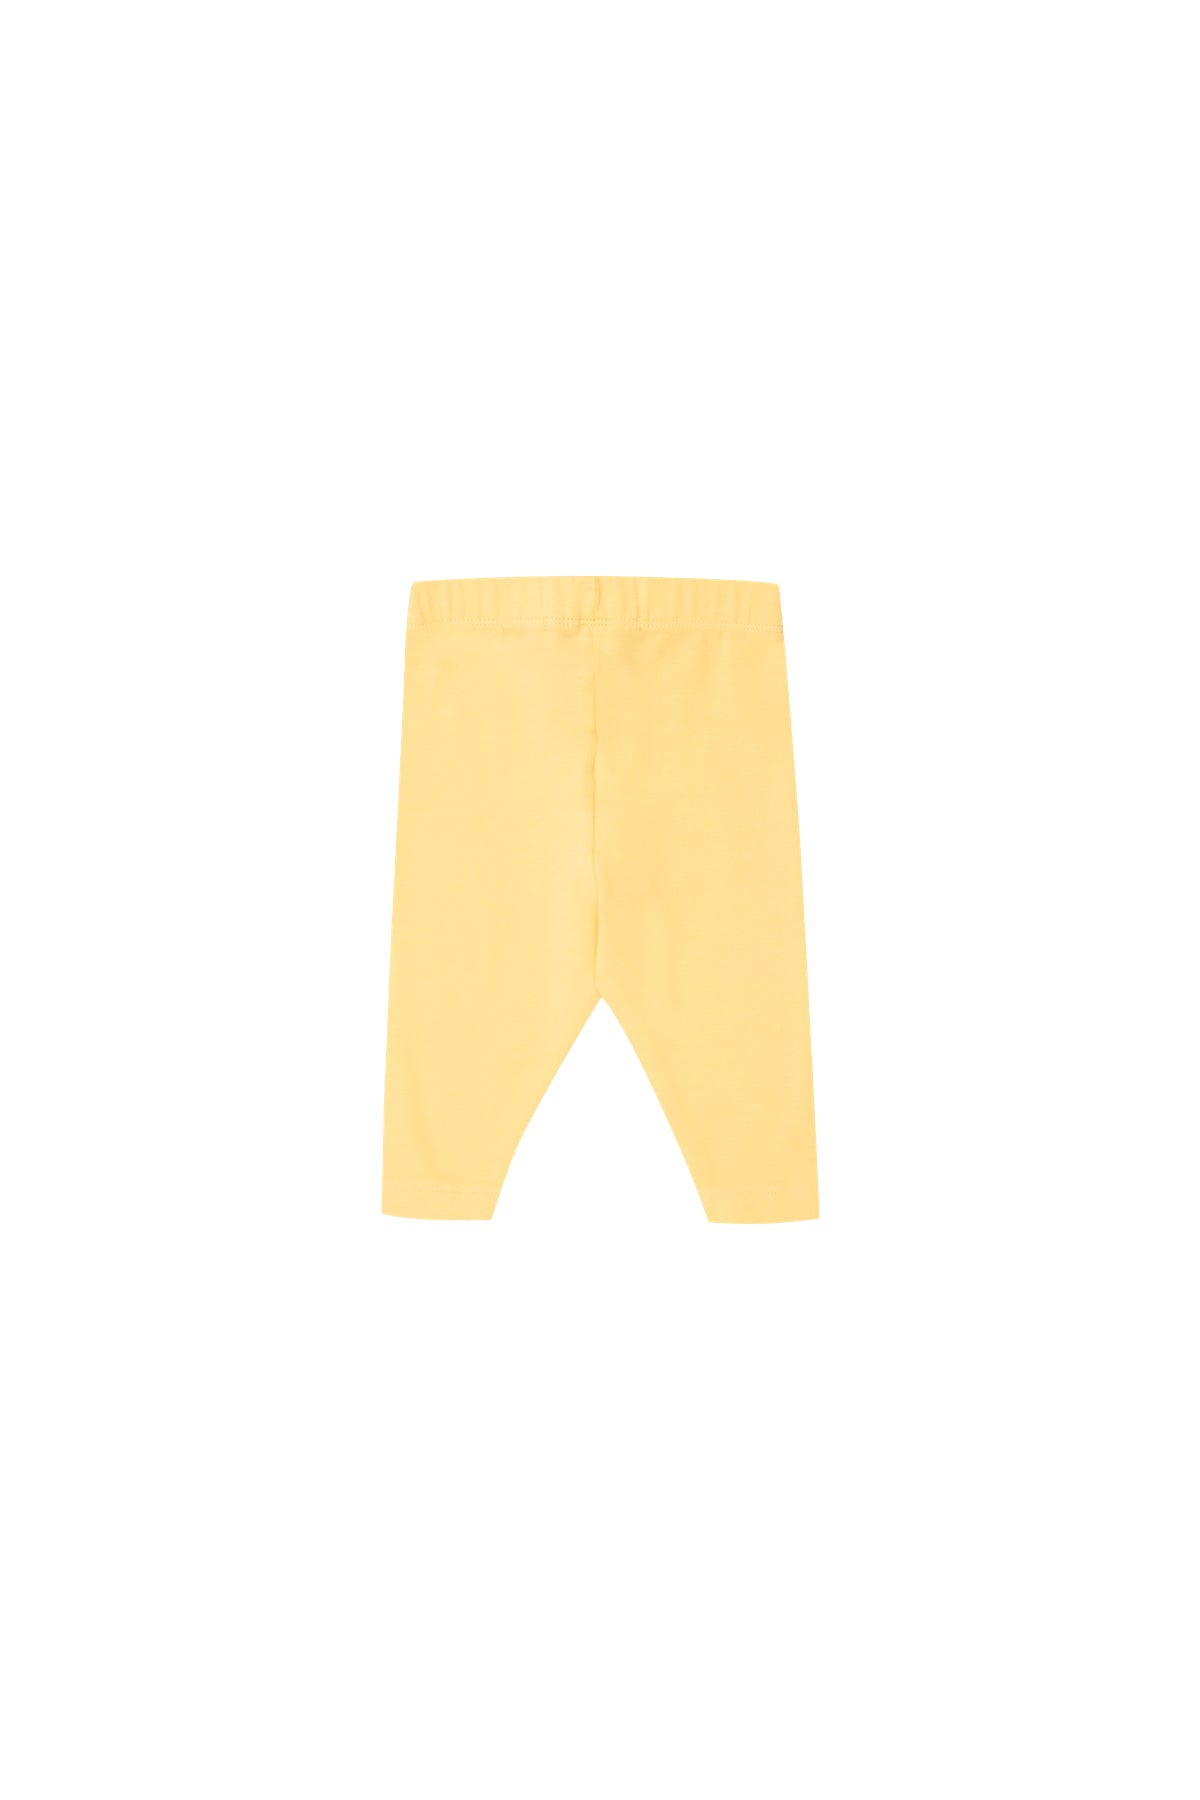 Tiny Cottons Stars Baby Pant - Mellow Yellow